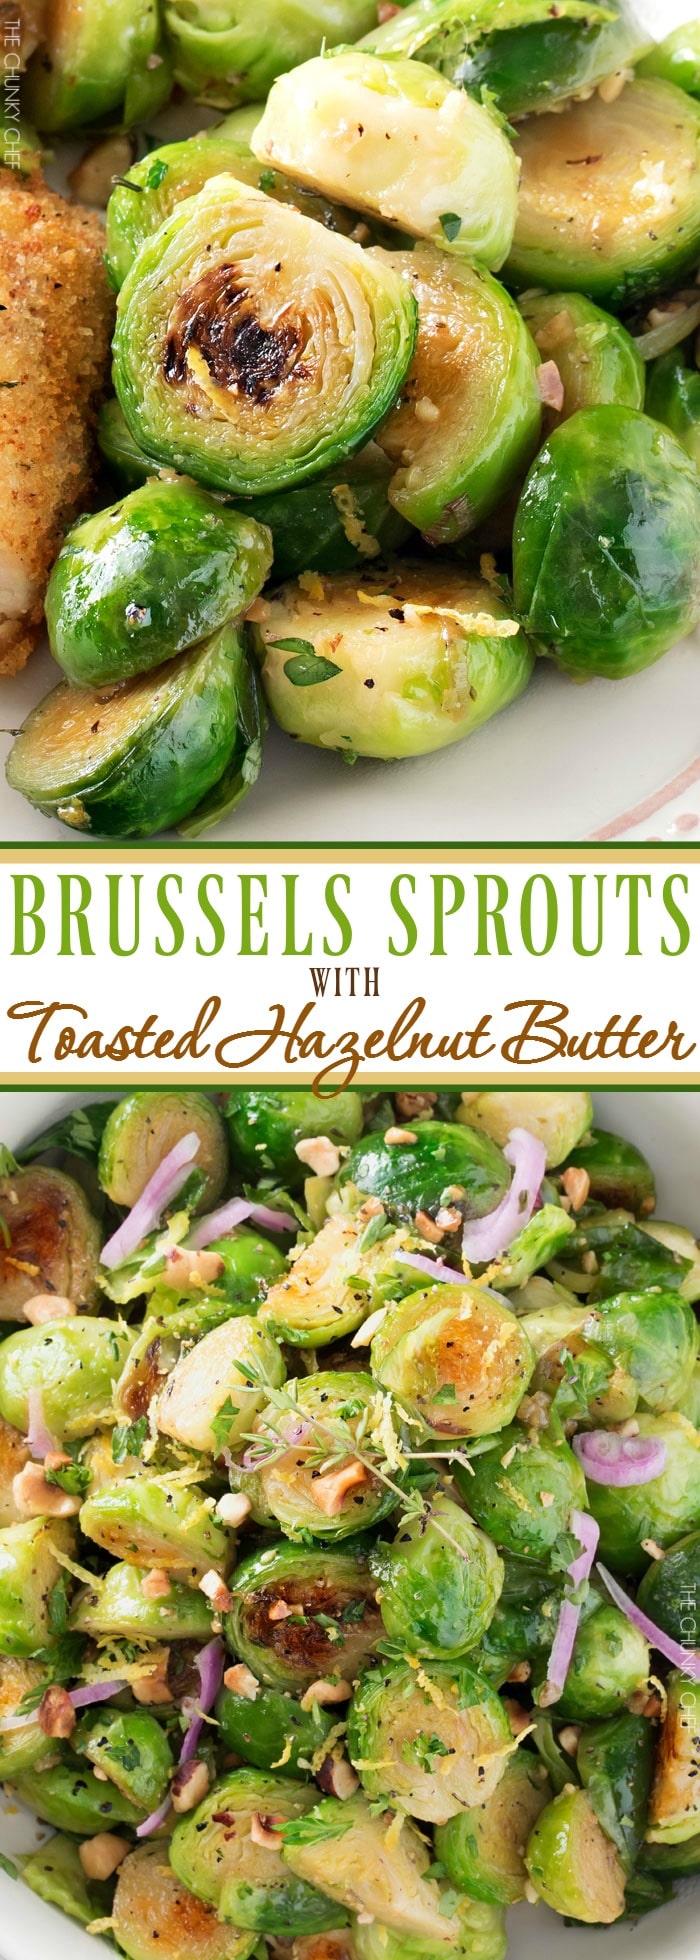 Brussels sprouts with Toasted Hazelnut Butter | Braised brussels sprouts and shallots are tossed with a savory toasted hazelnut and herb butter and ready to hit your table in less than 30 minutes! | http://thechunkychef.com